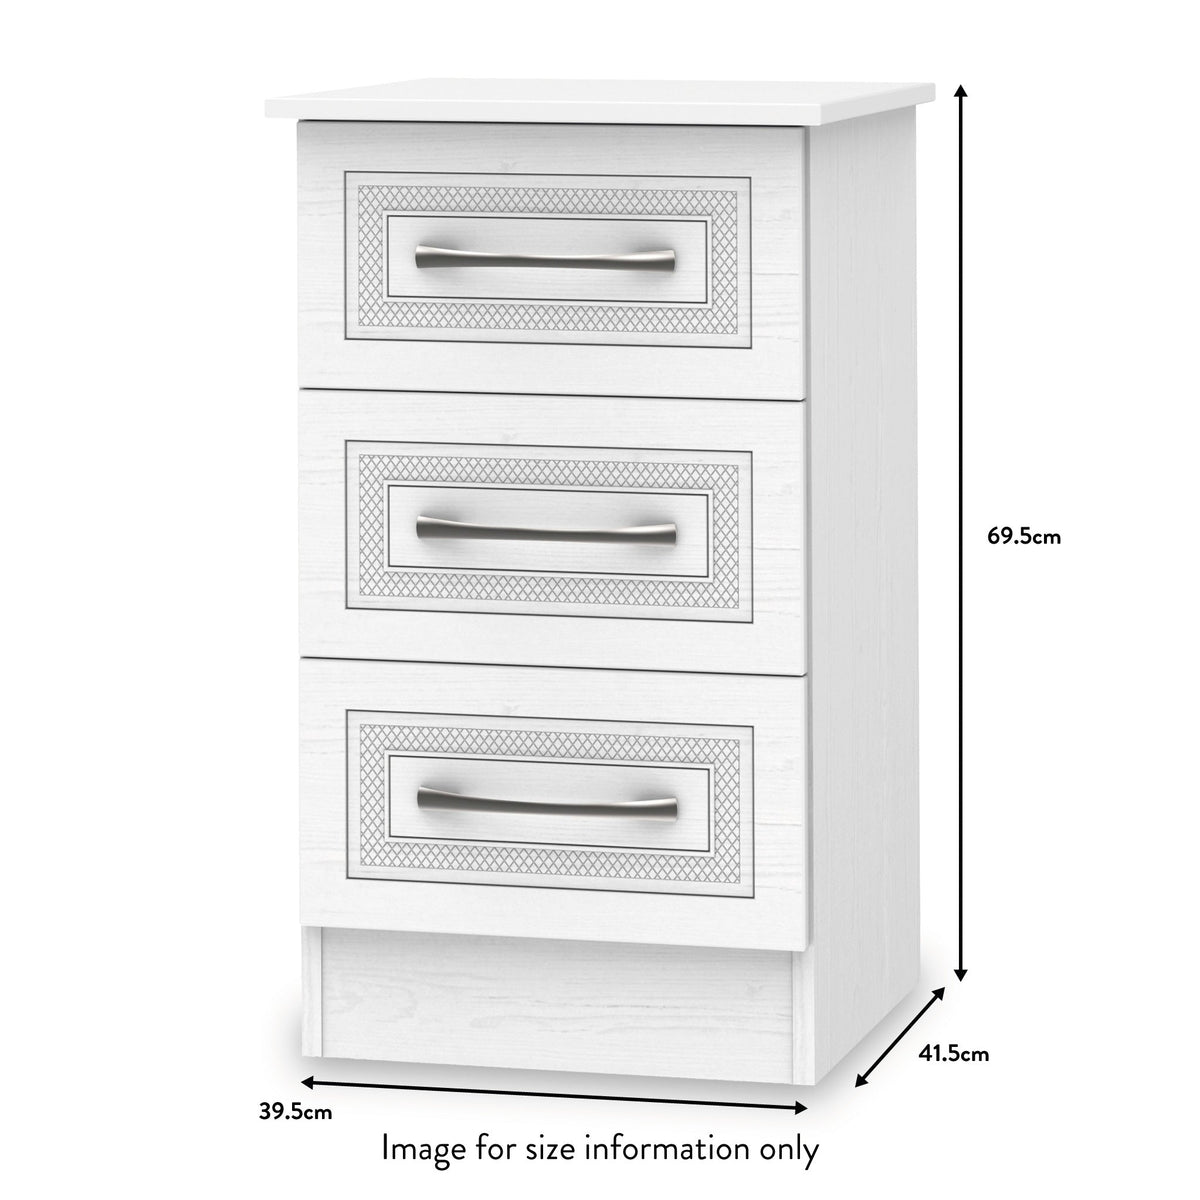 Killgarth White 3 Drawer Bedside Table dimensions